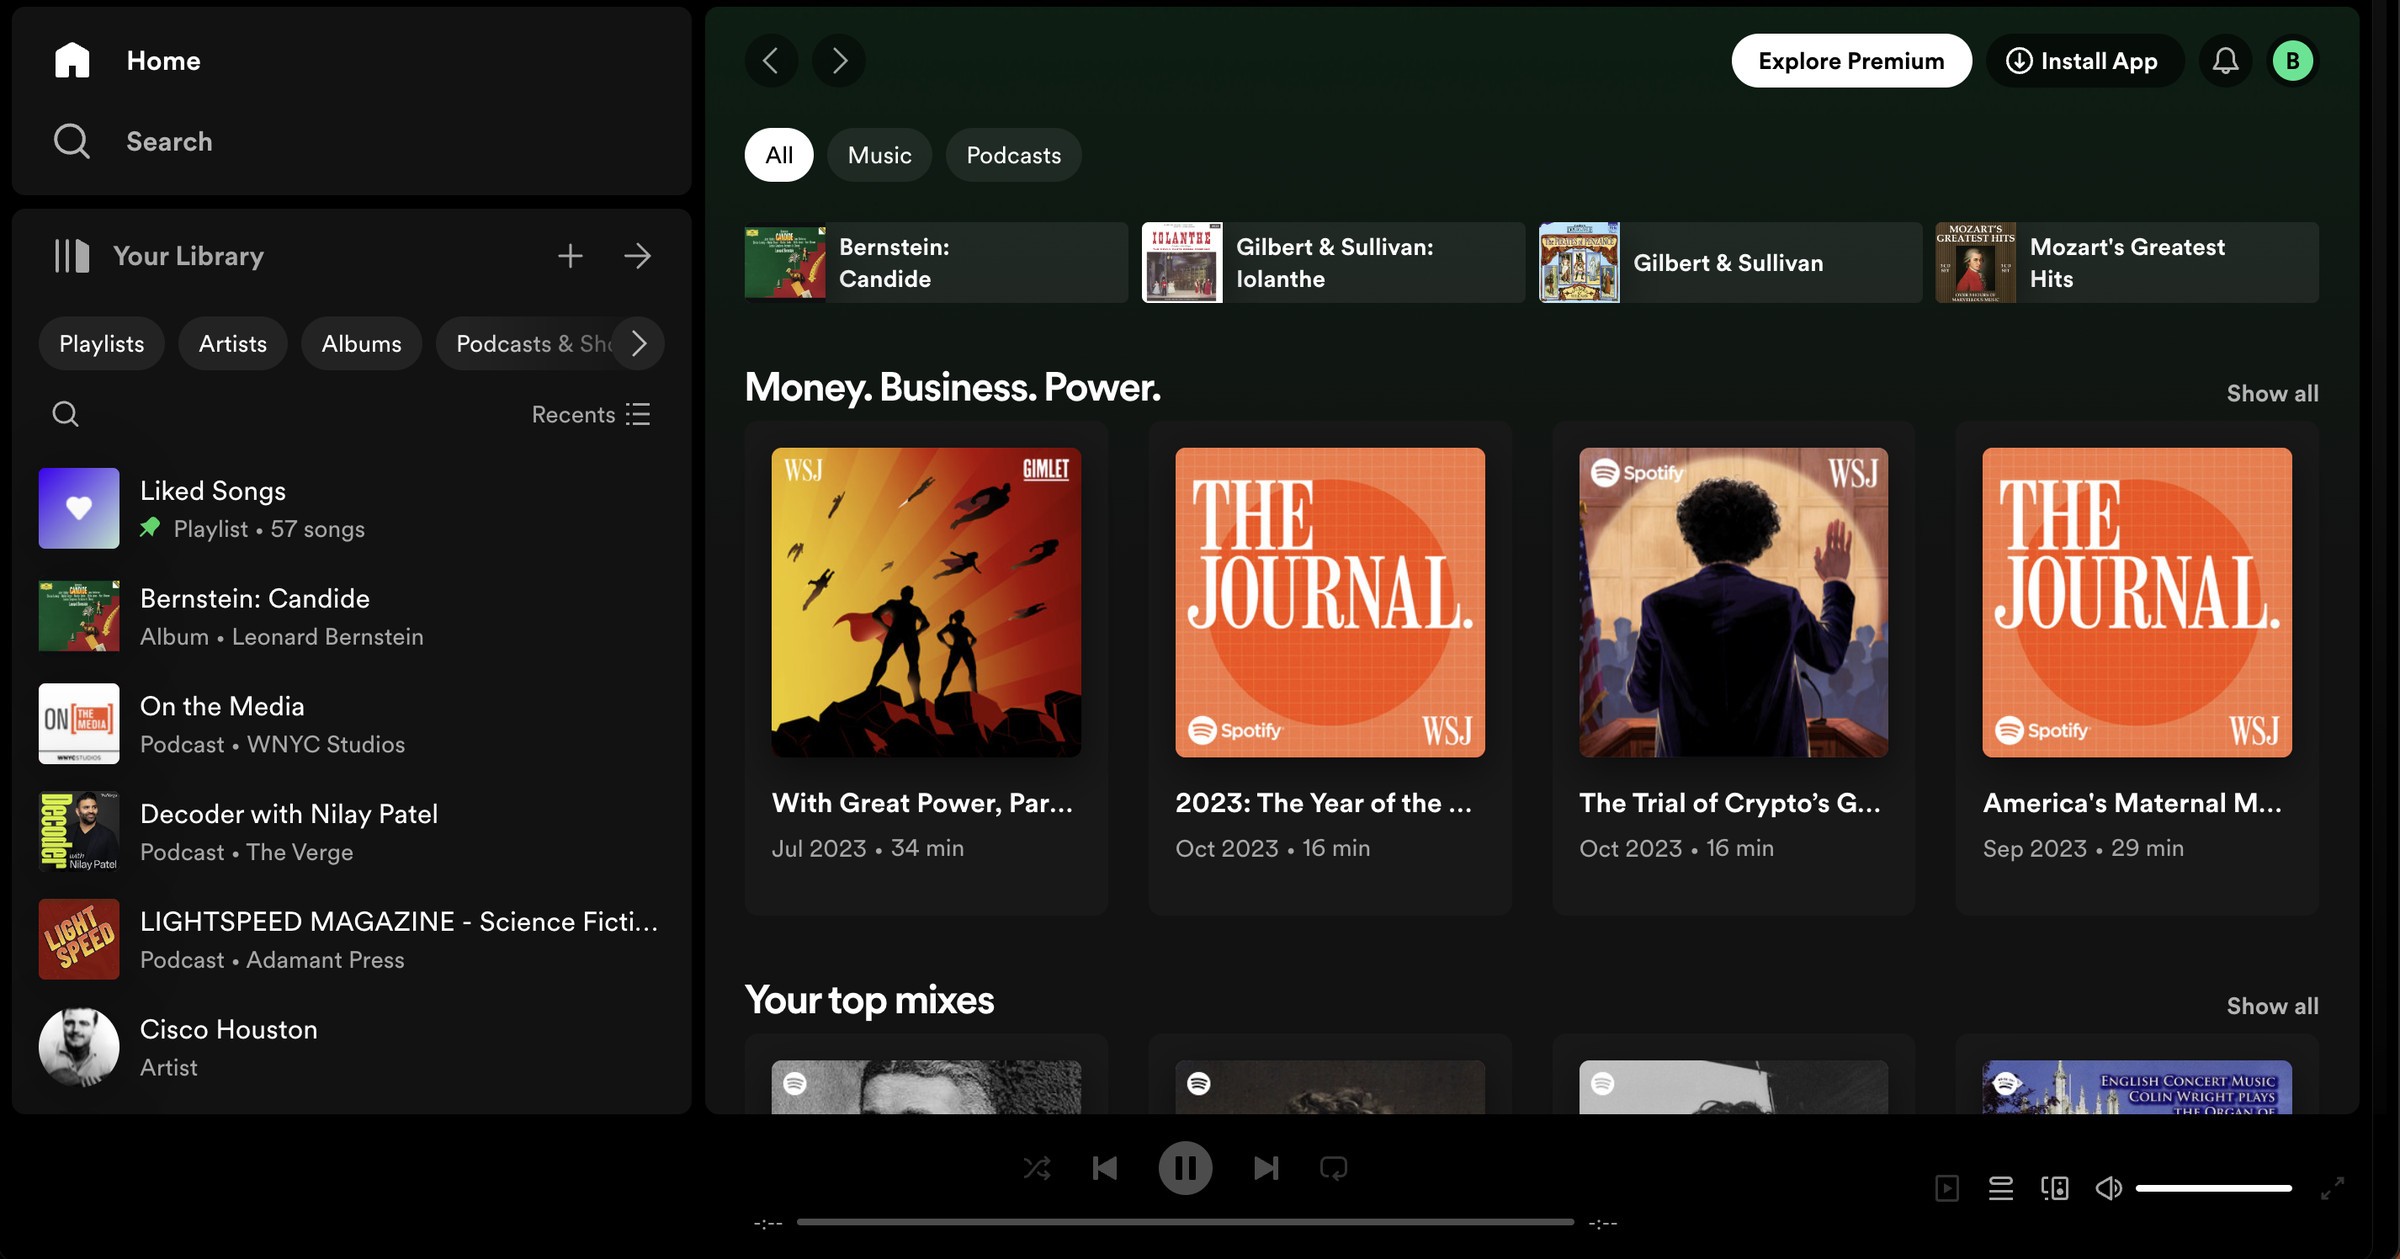 Spotify website with list of favorites on left, business podcasts with large icons in center.